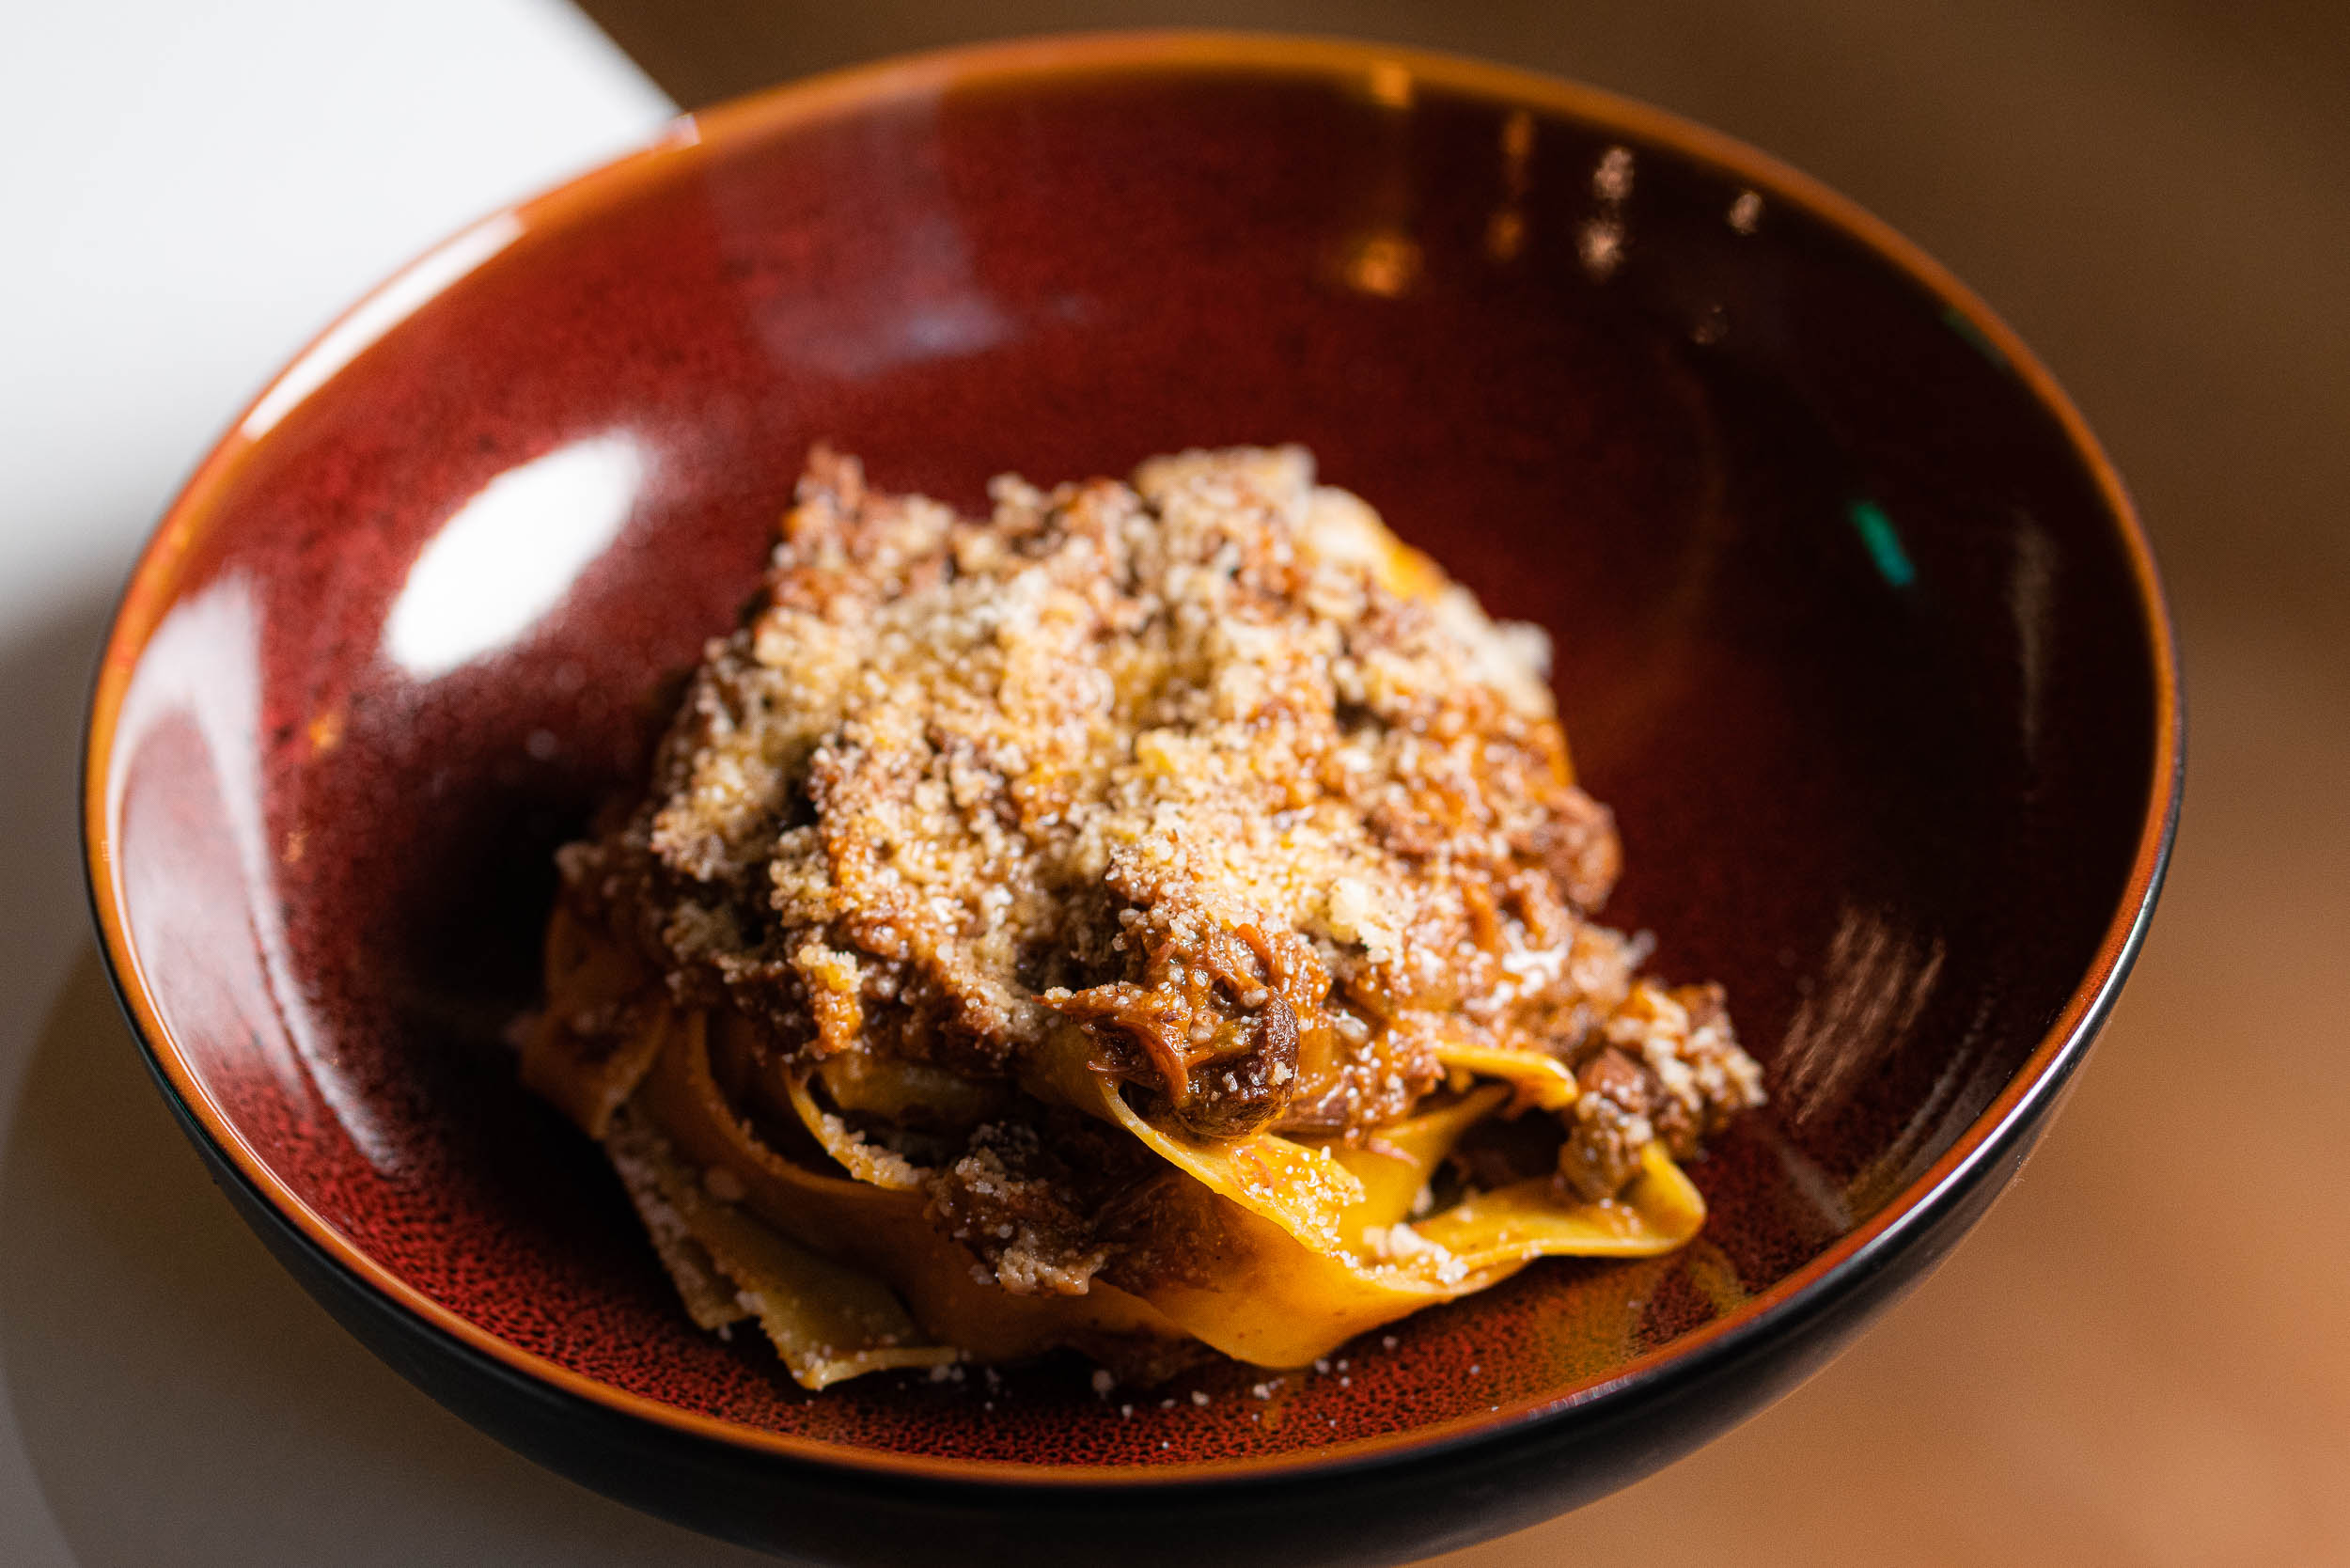 Pappardelle with Genoese ragout